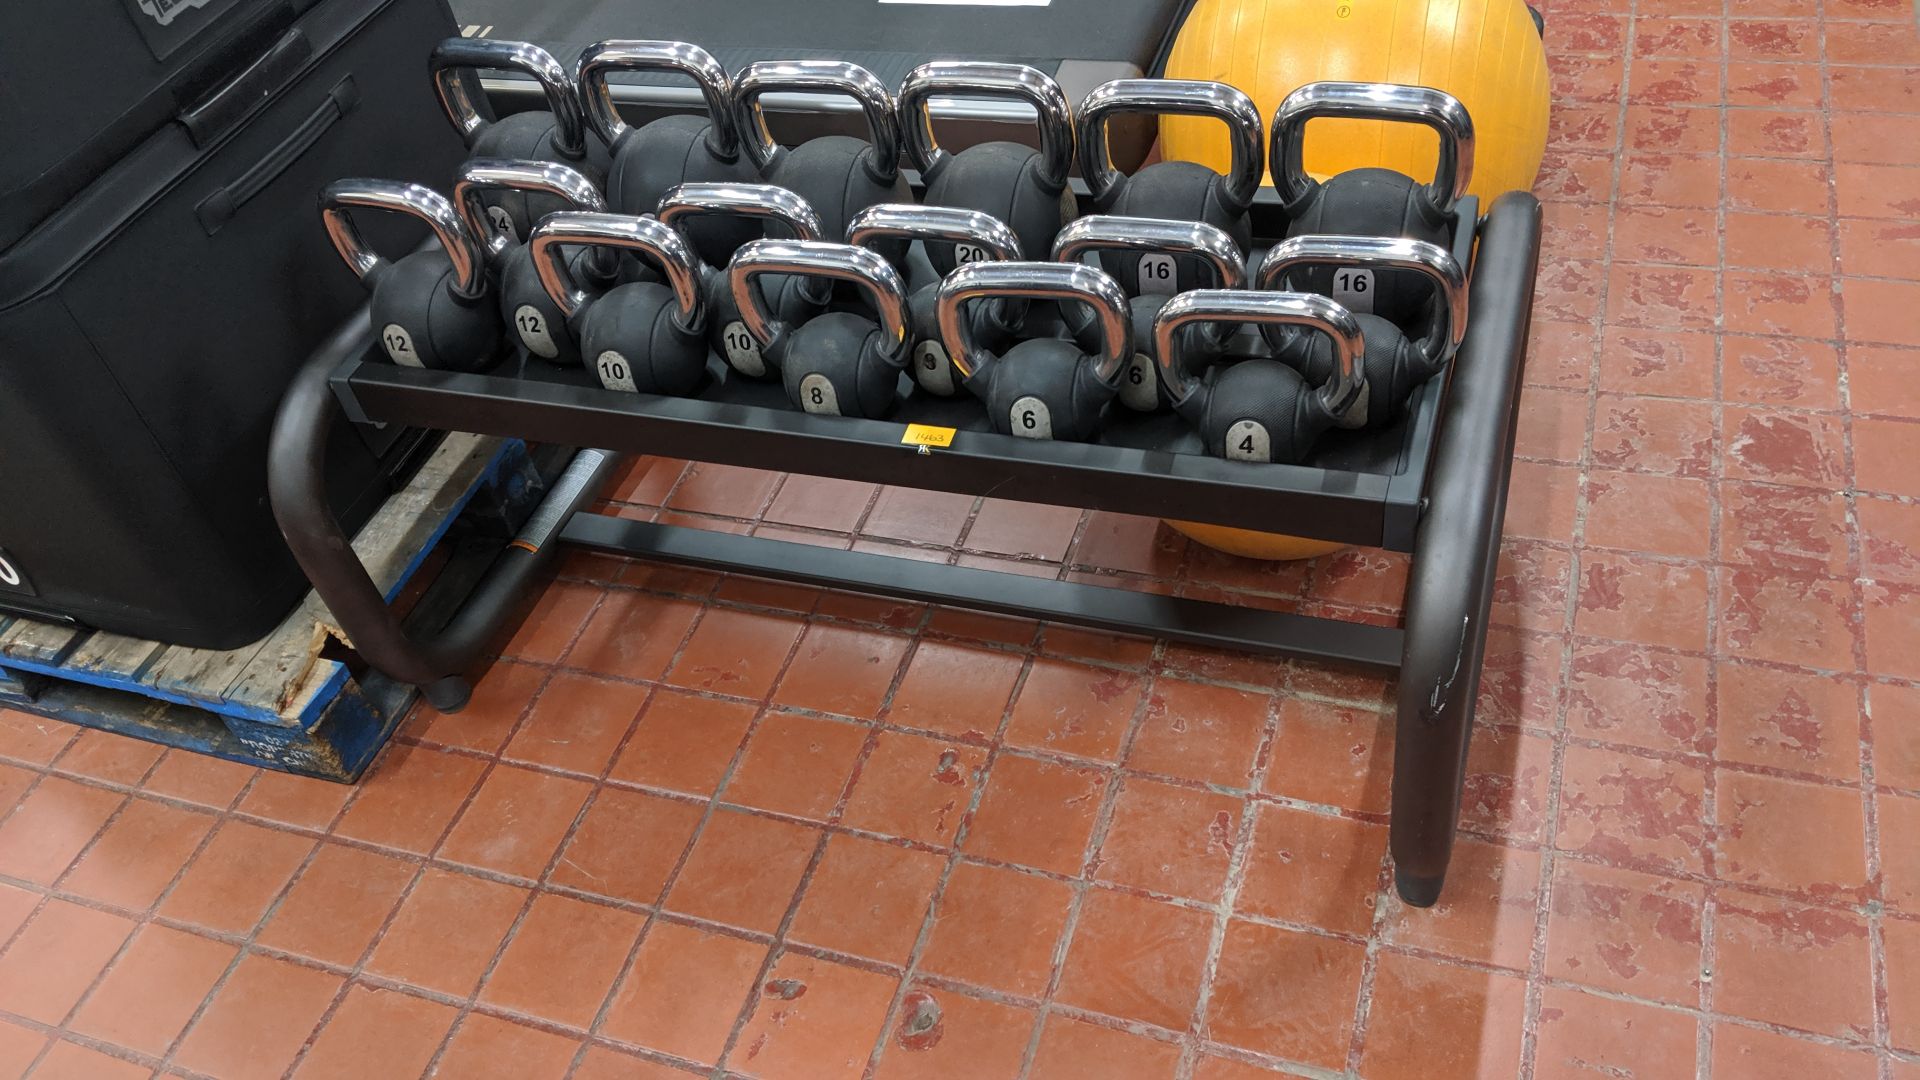 Quantity of Technogym kettlebells and heavy-duty stand for use with same - there are 8 pairs of